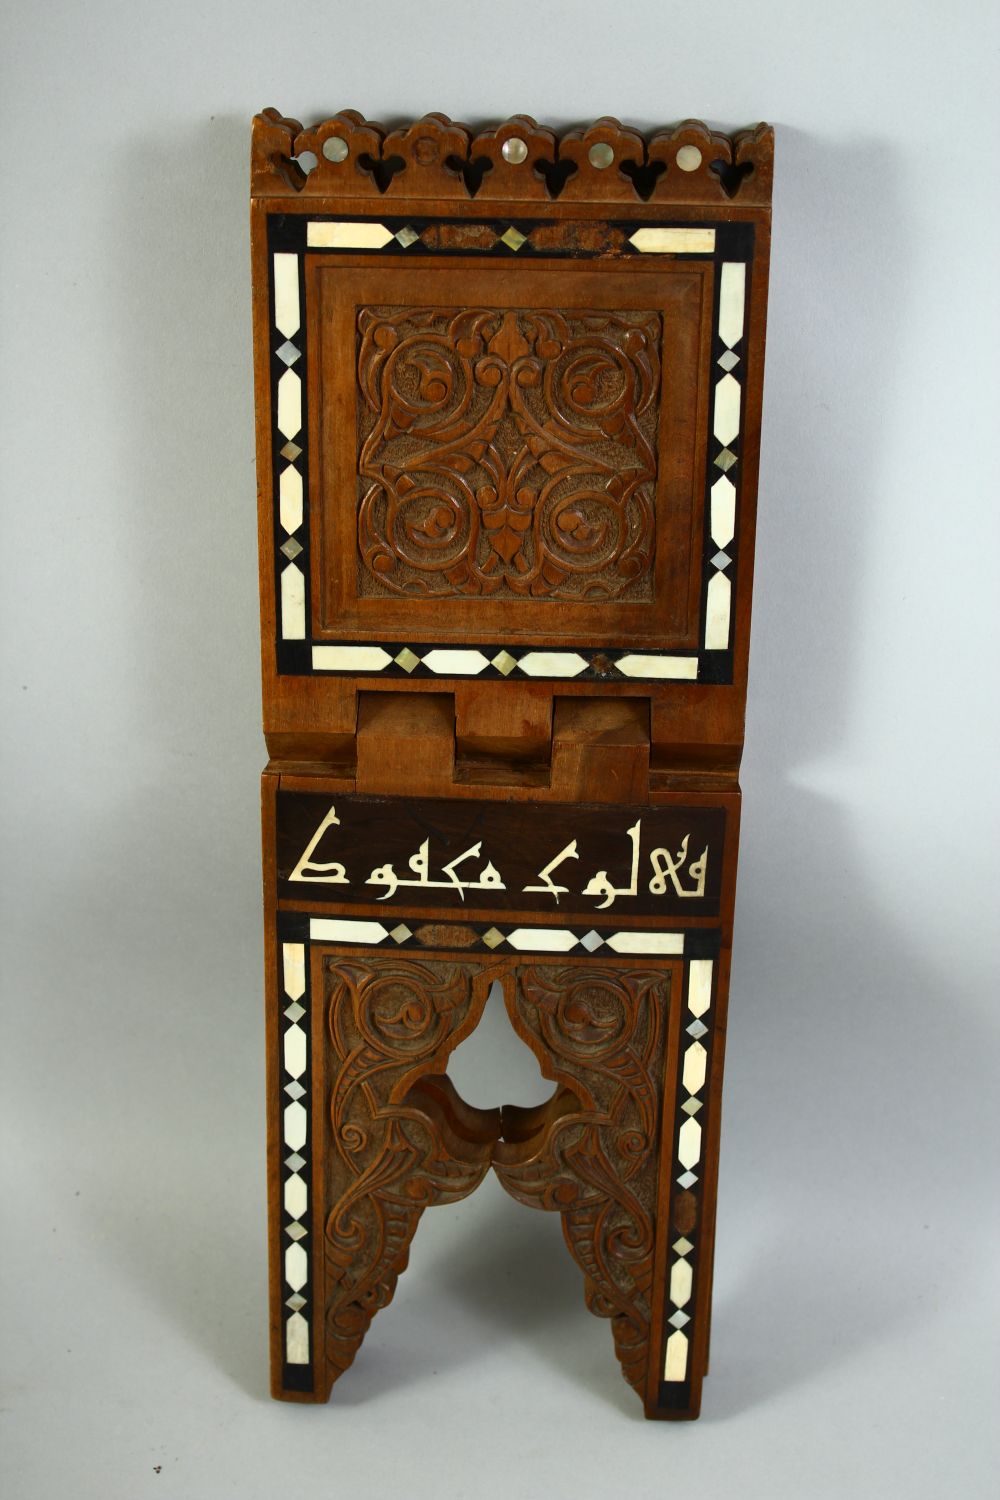 A FINE 19TH CENTURY ISLAMIC OTTOMAN BONE AND MOTHER OF PEARL INLAID QURAN BOOK STAND, carved with - Image 7 of 7